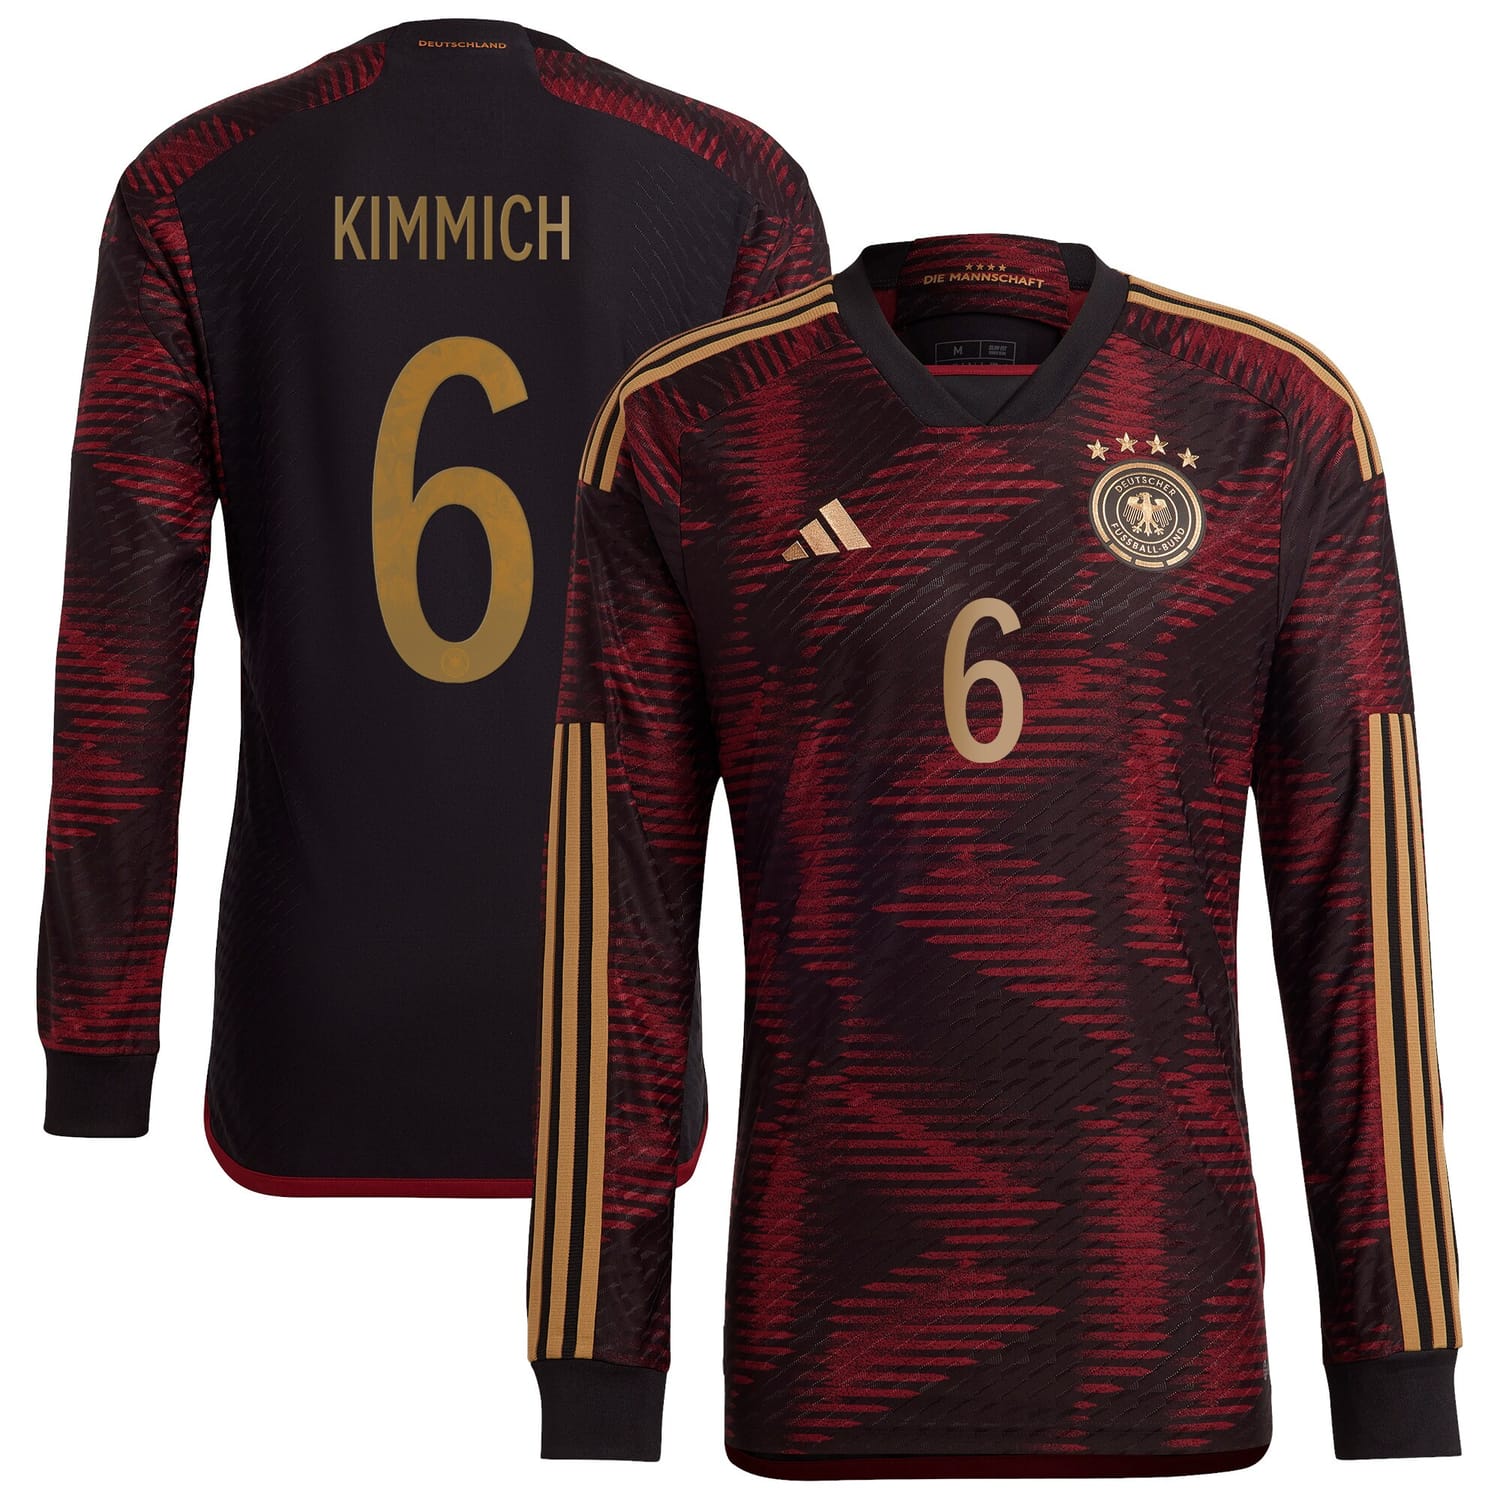 Germany National Team Away Authentic Jersey Shirt Long Sleeve player Joshua Kimmich 6 printing for Men